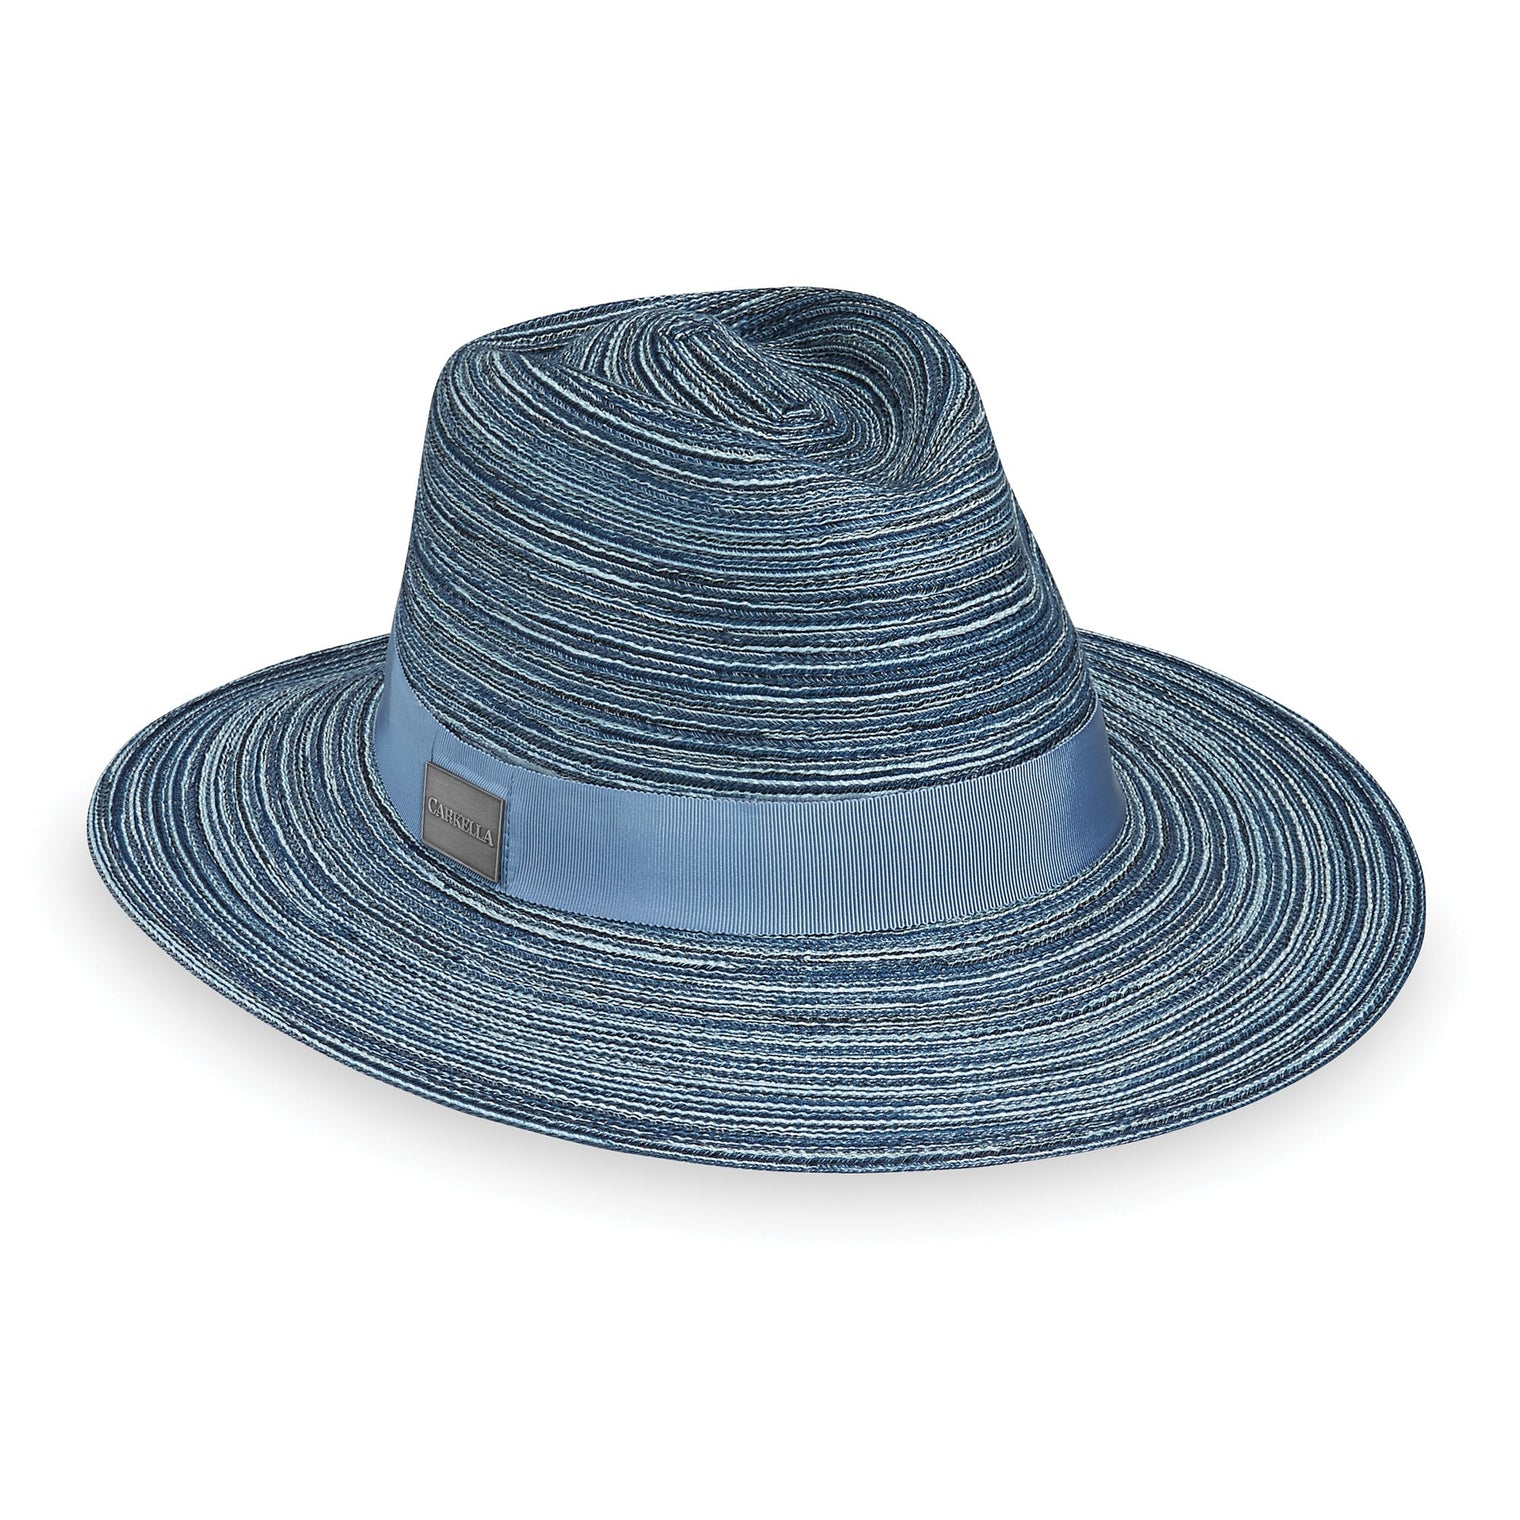 Featuring Front View of Packable Unisex Sydeny Fedora Style UPF Sun Hat in Blue from Carkella by Wallaroo